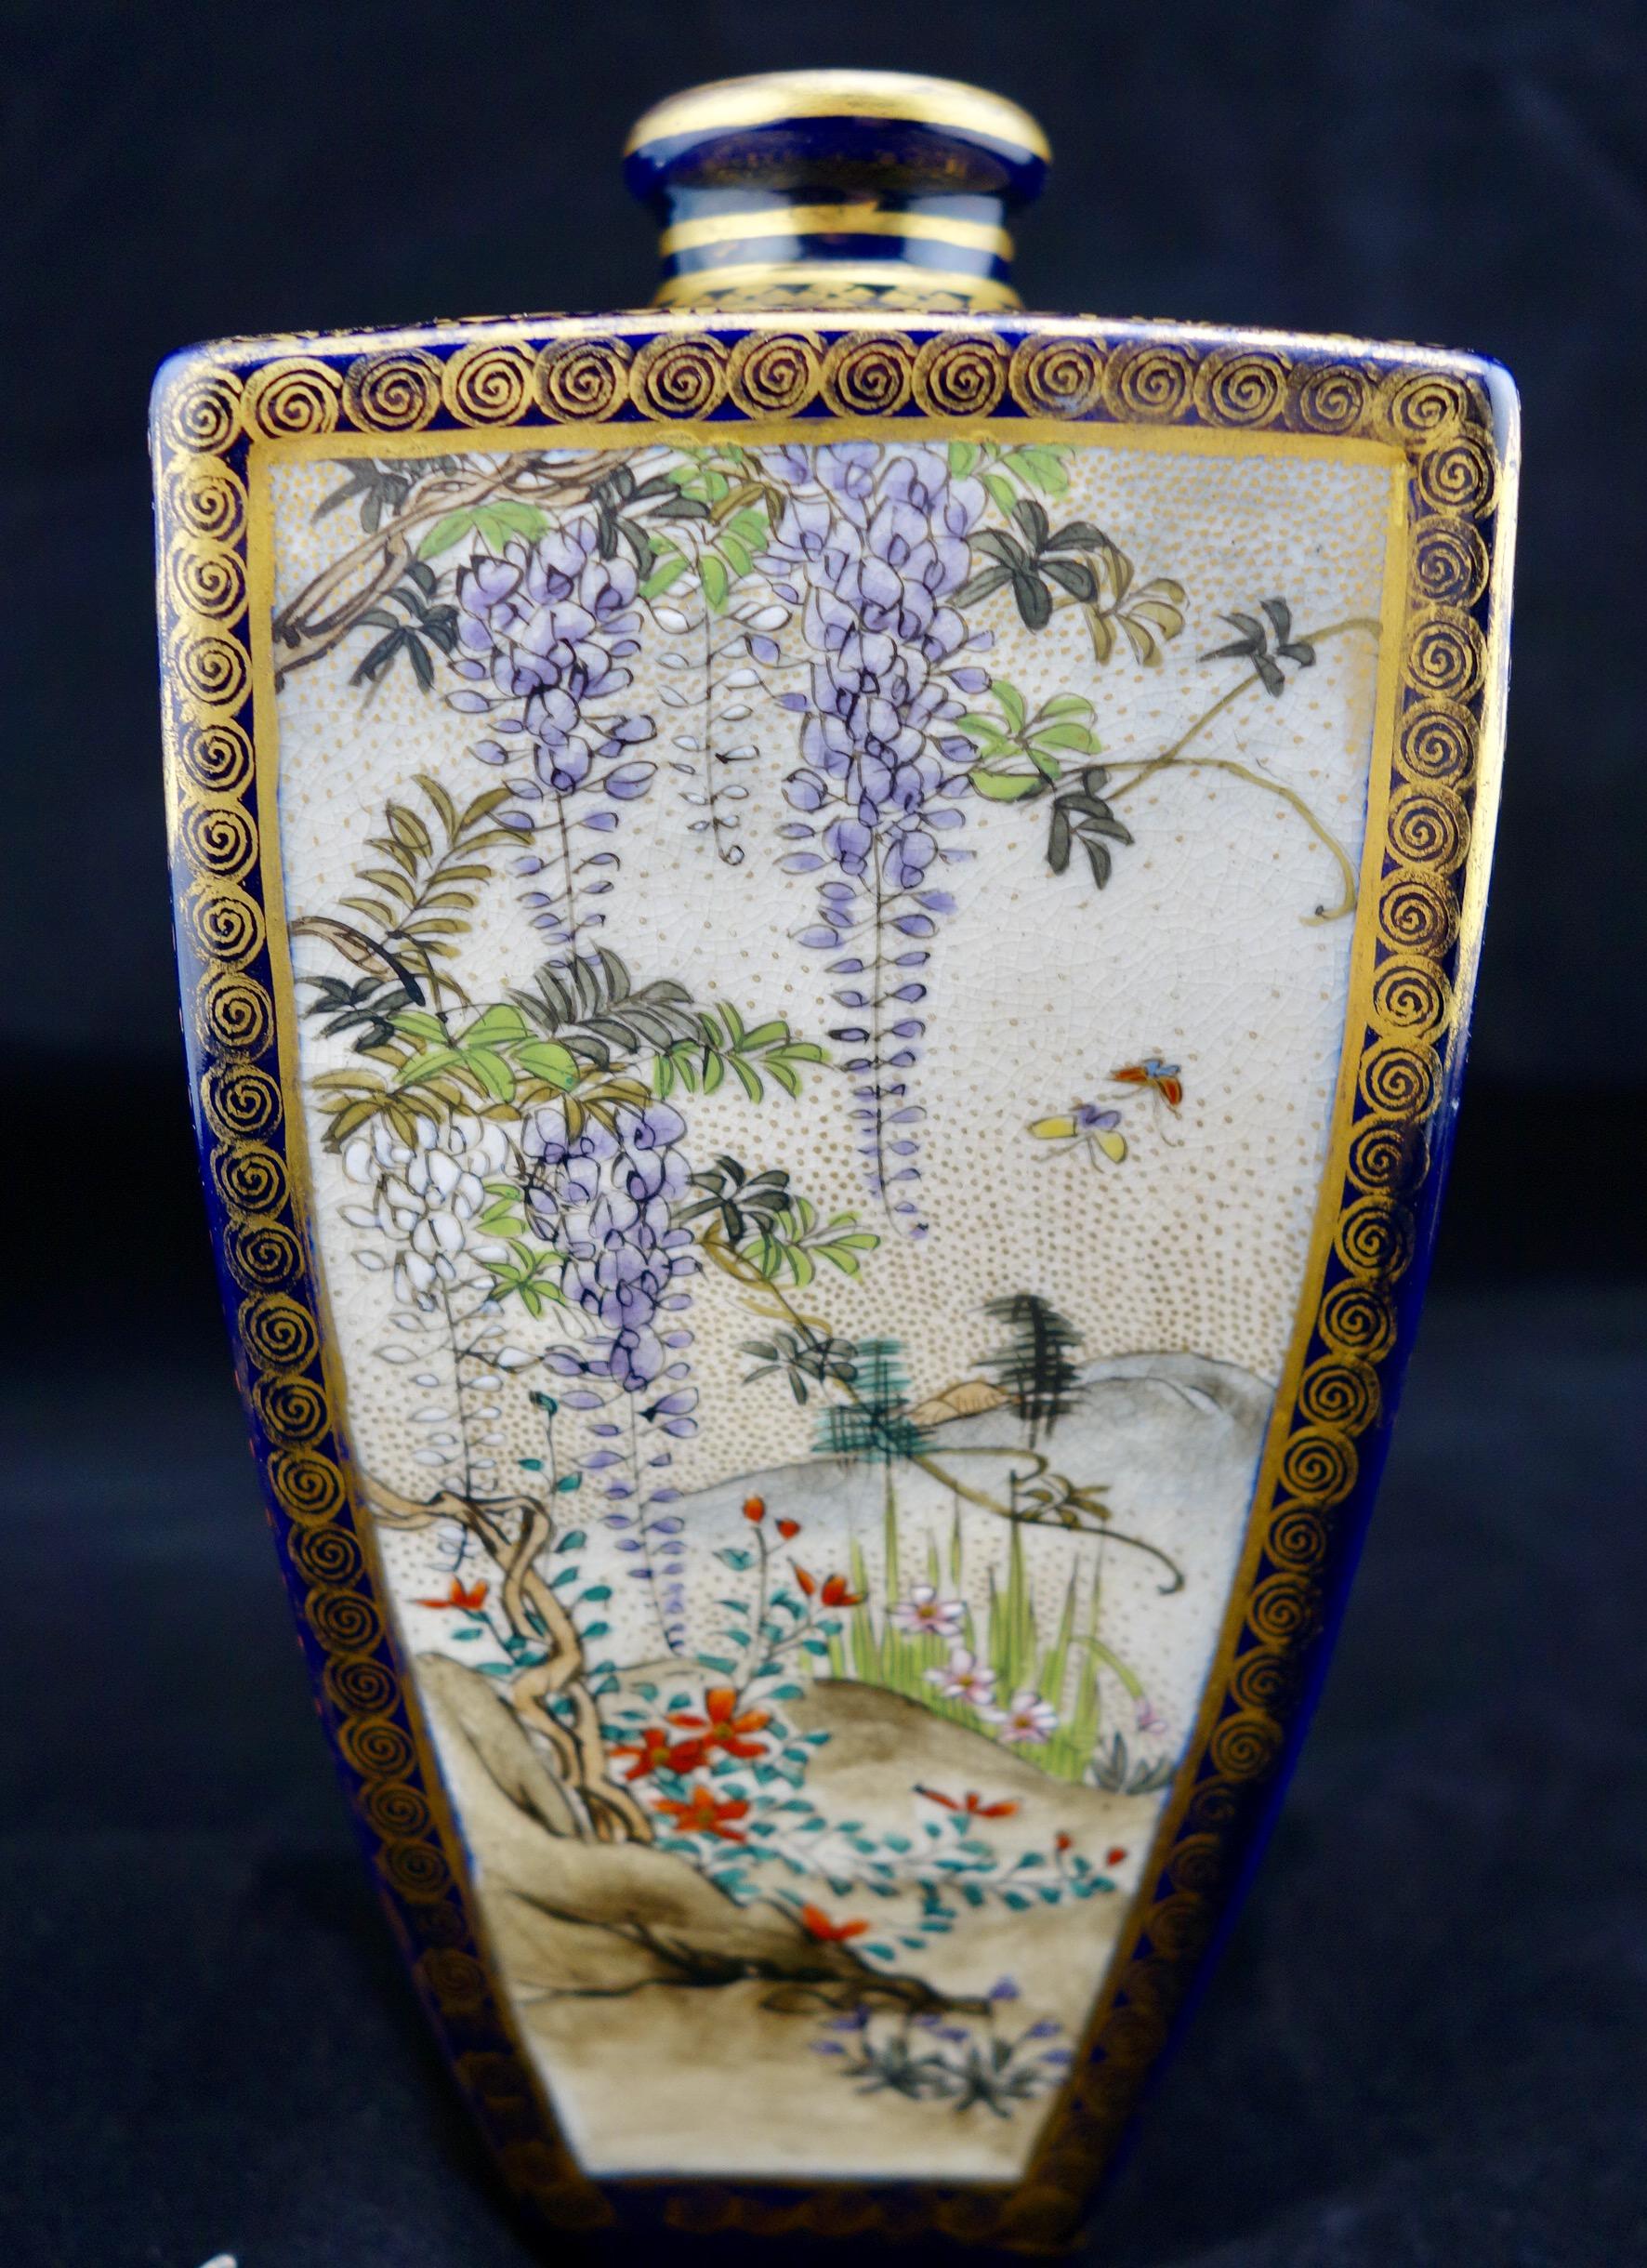 Japanese Meiji Satsuma polygonal vase with four panels. Each panel shows a different scene. Fine gilding and hand enameling. Marked on the bottom with shimadzu mon.